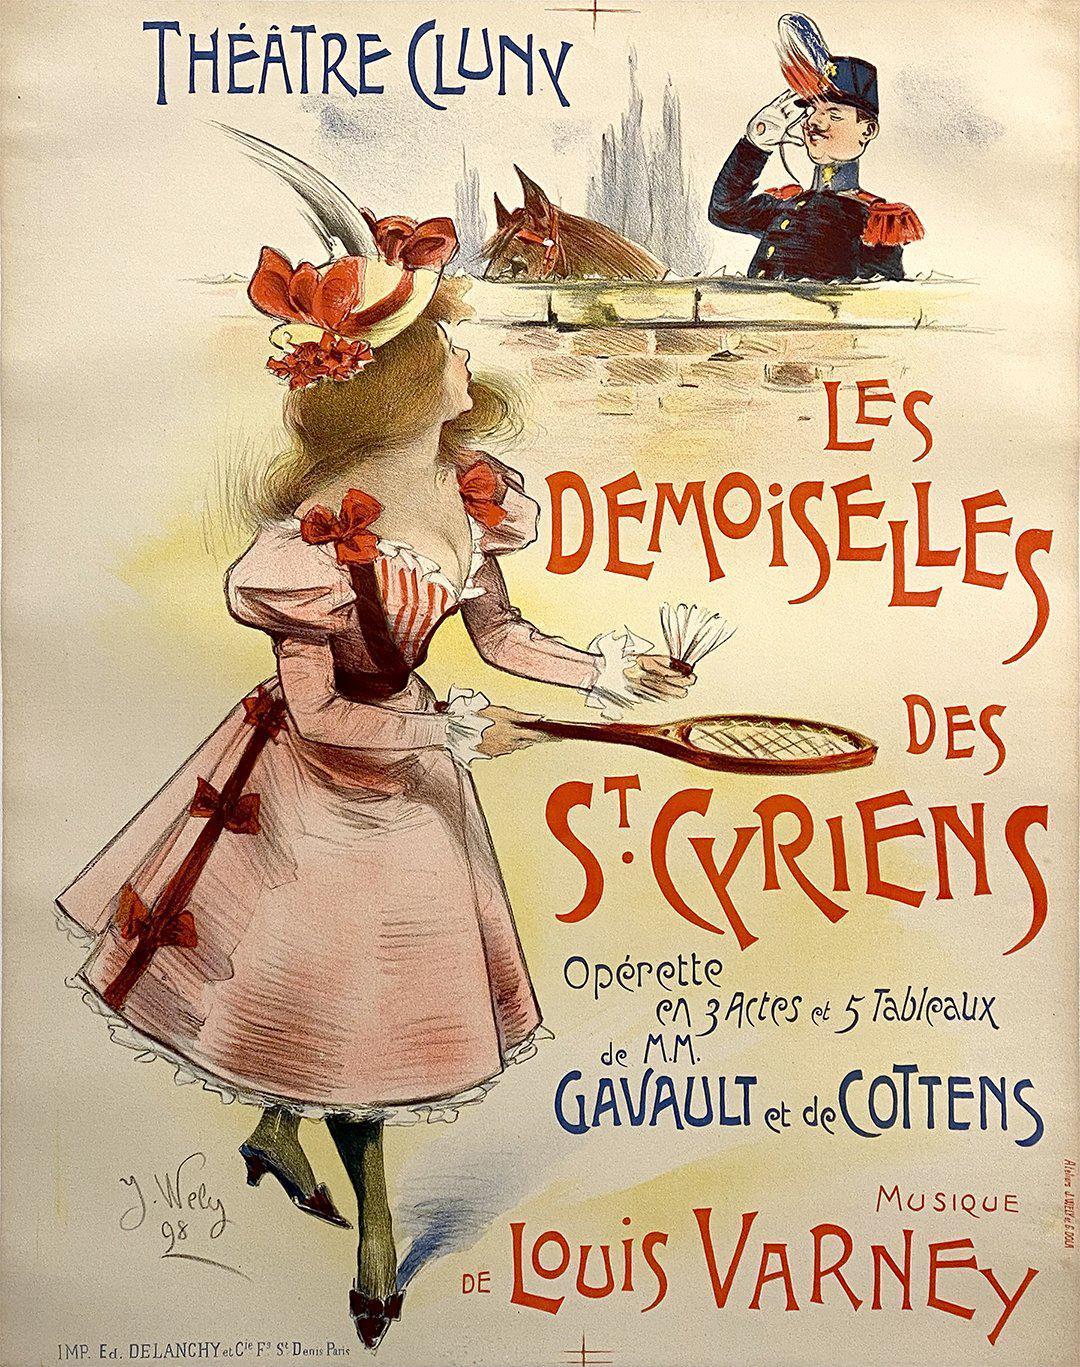 Original French Operetta Poster Les Demoiselles des St. Cyriens by Jacques Wely 1898